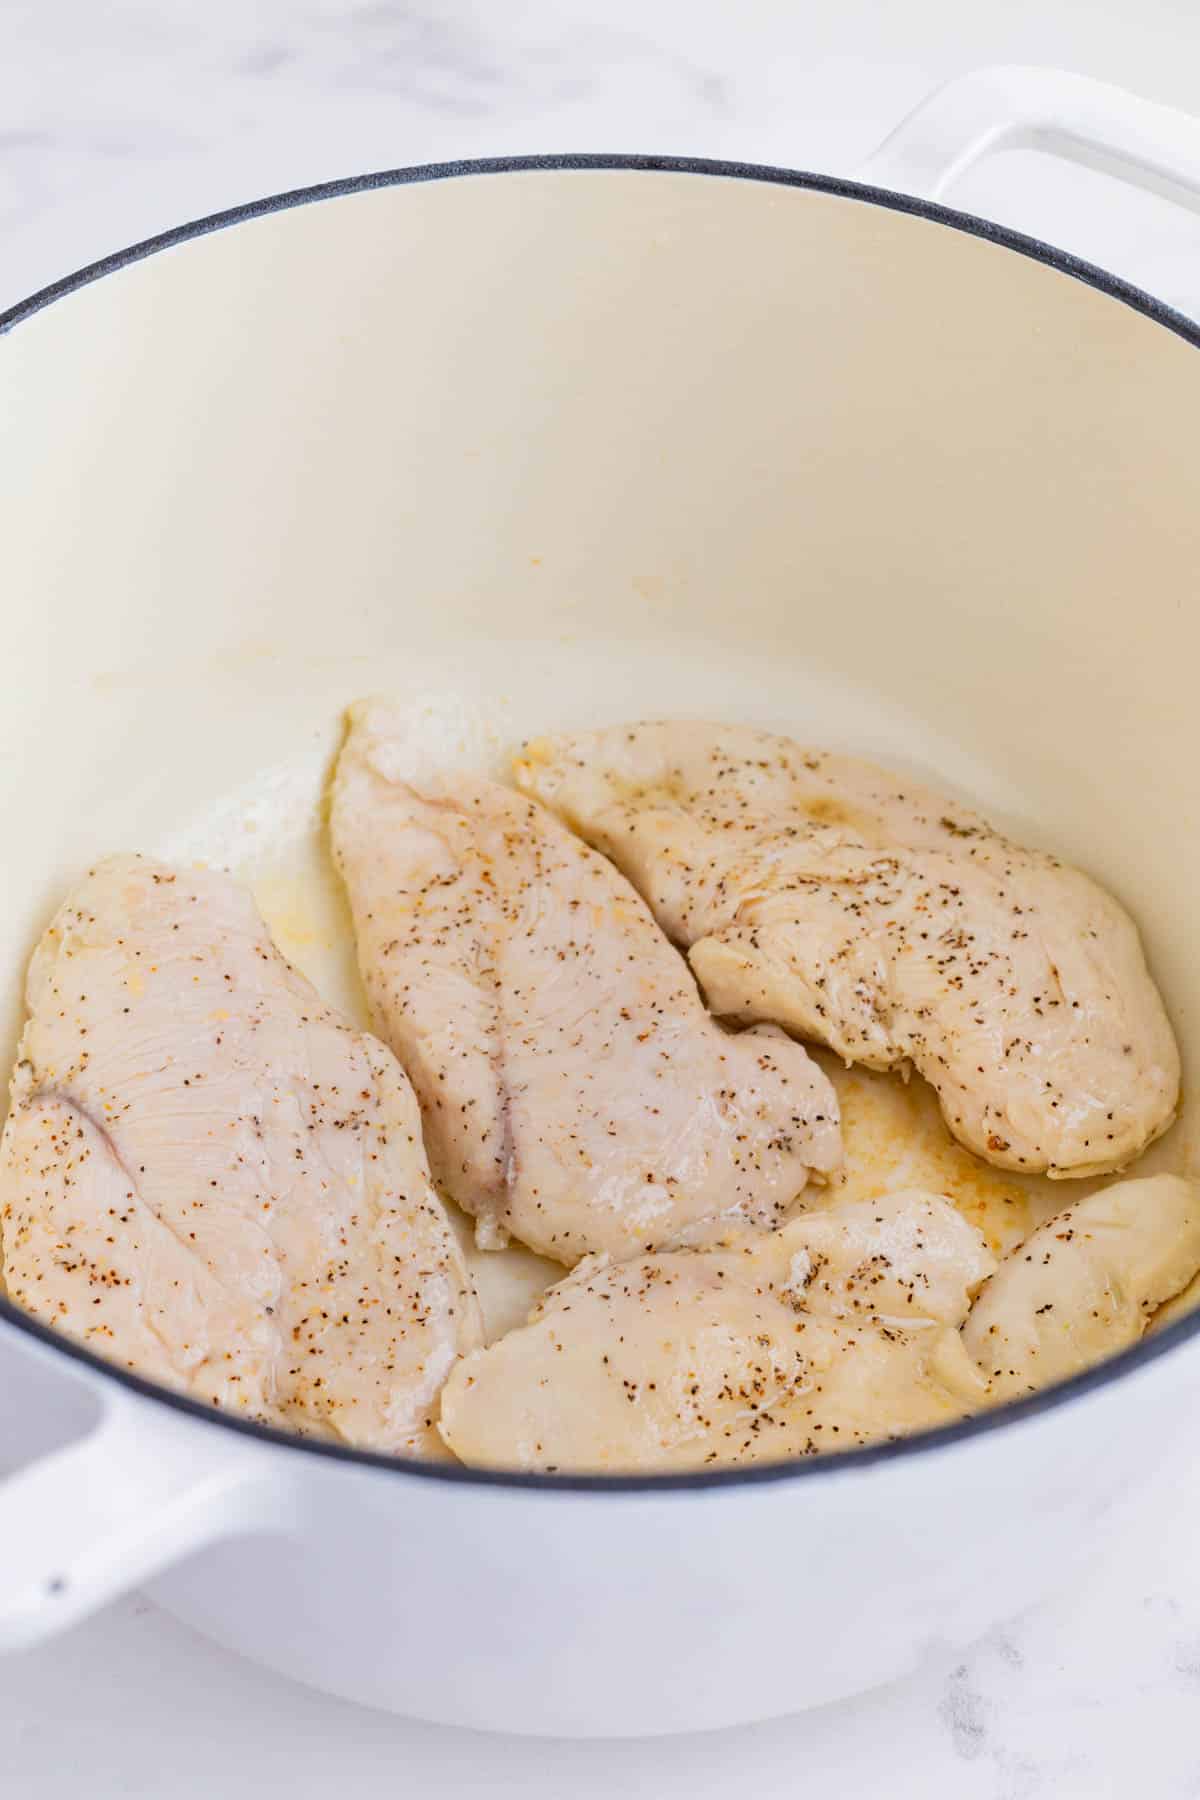 Prepared chicken is cooked in oil in a skillet.